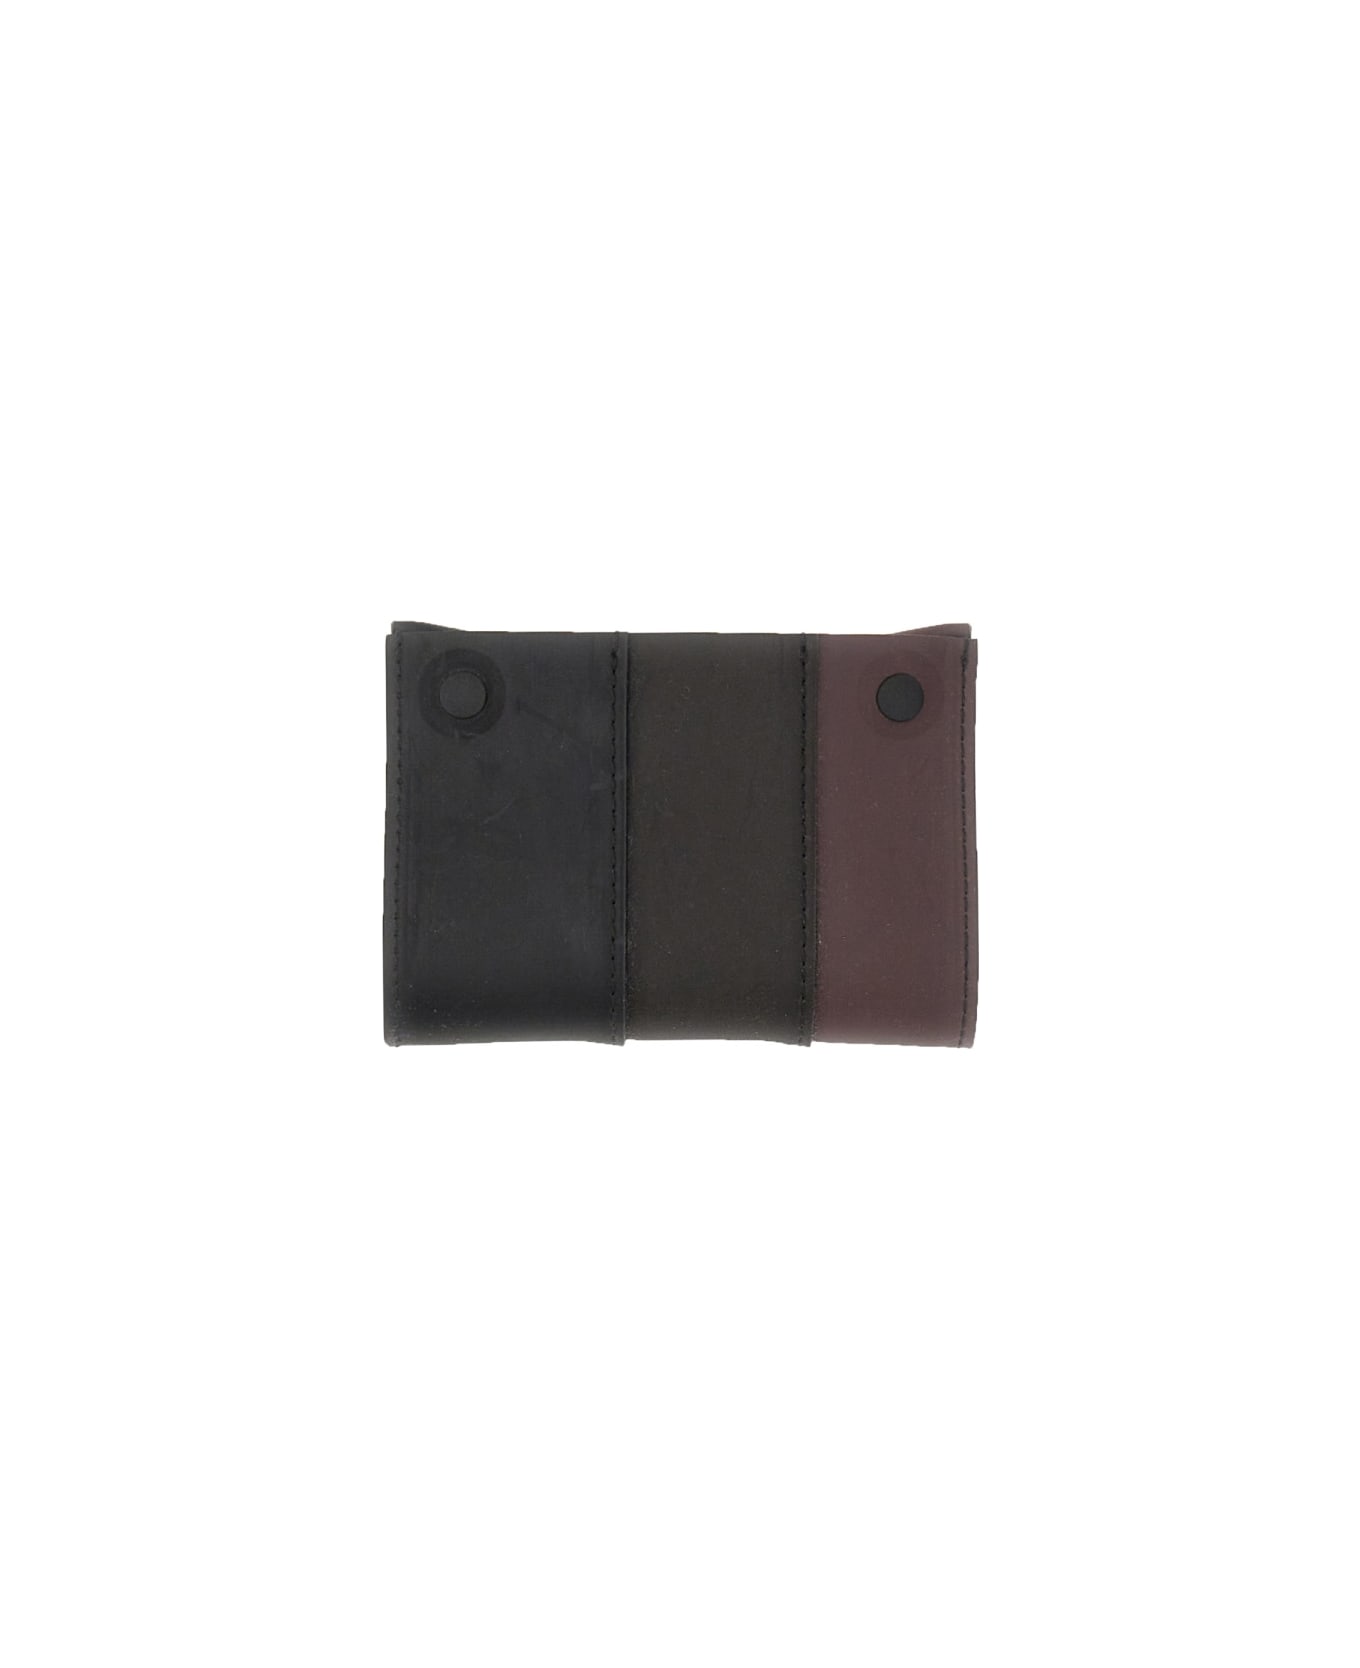 Sunnei Parallelepiped Pudding Wallet - BLACK